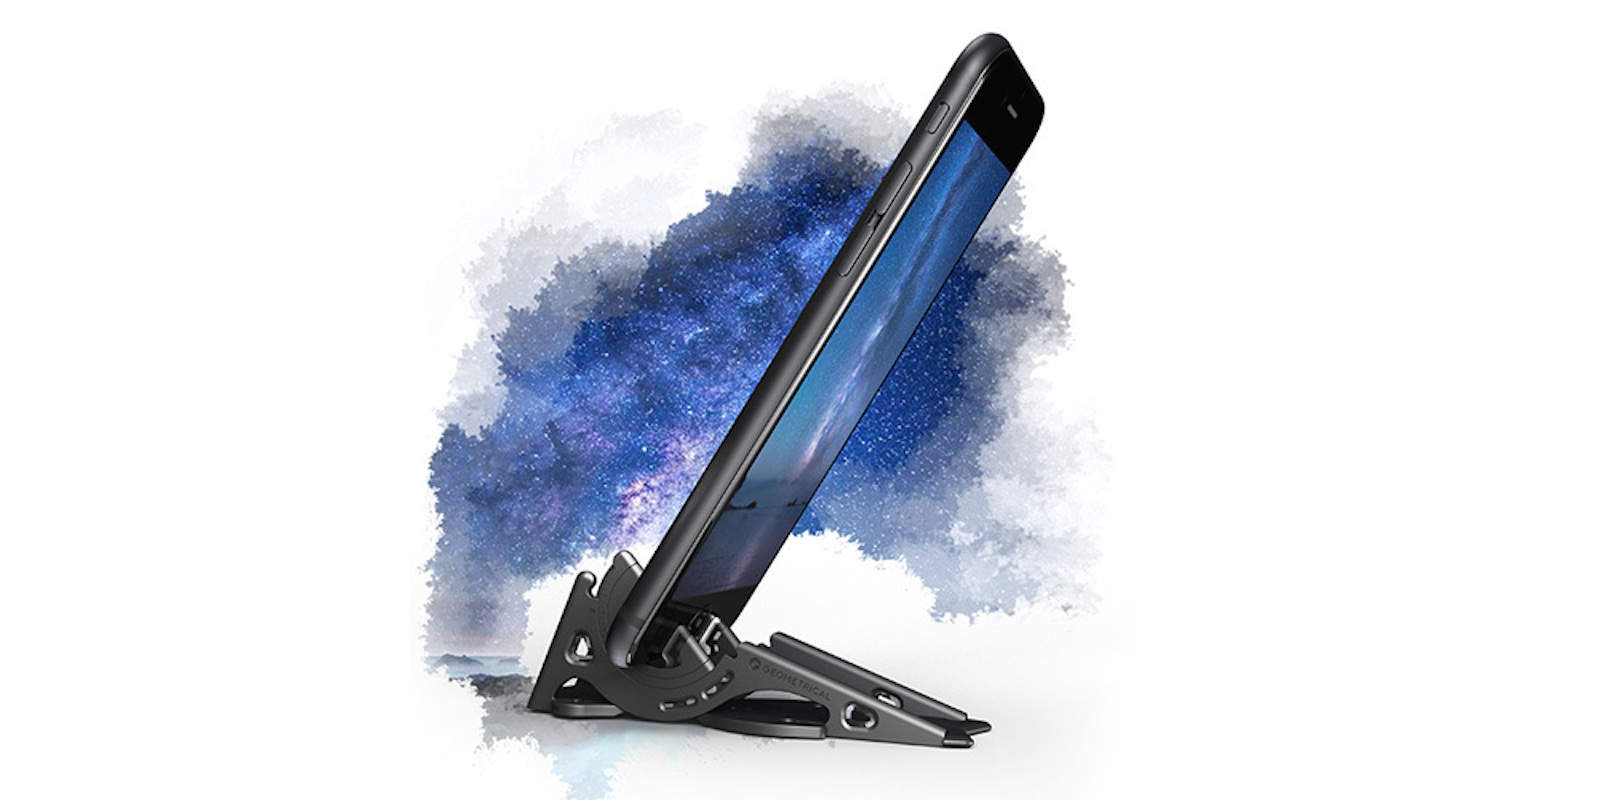 This tripod is tough and versatile, yet folds up to fit in your wallet.